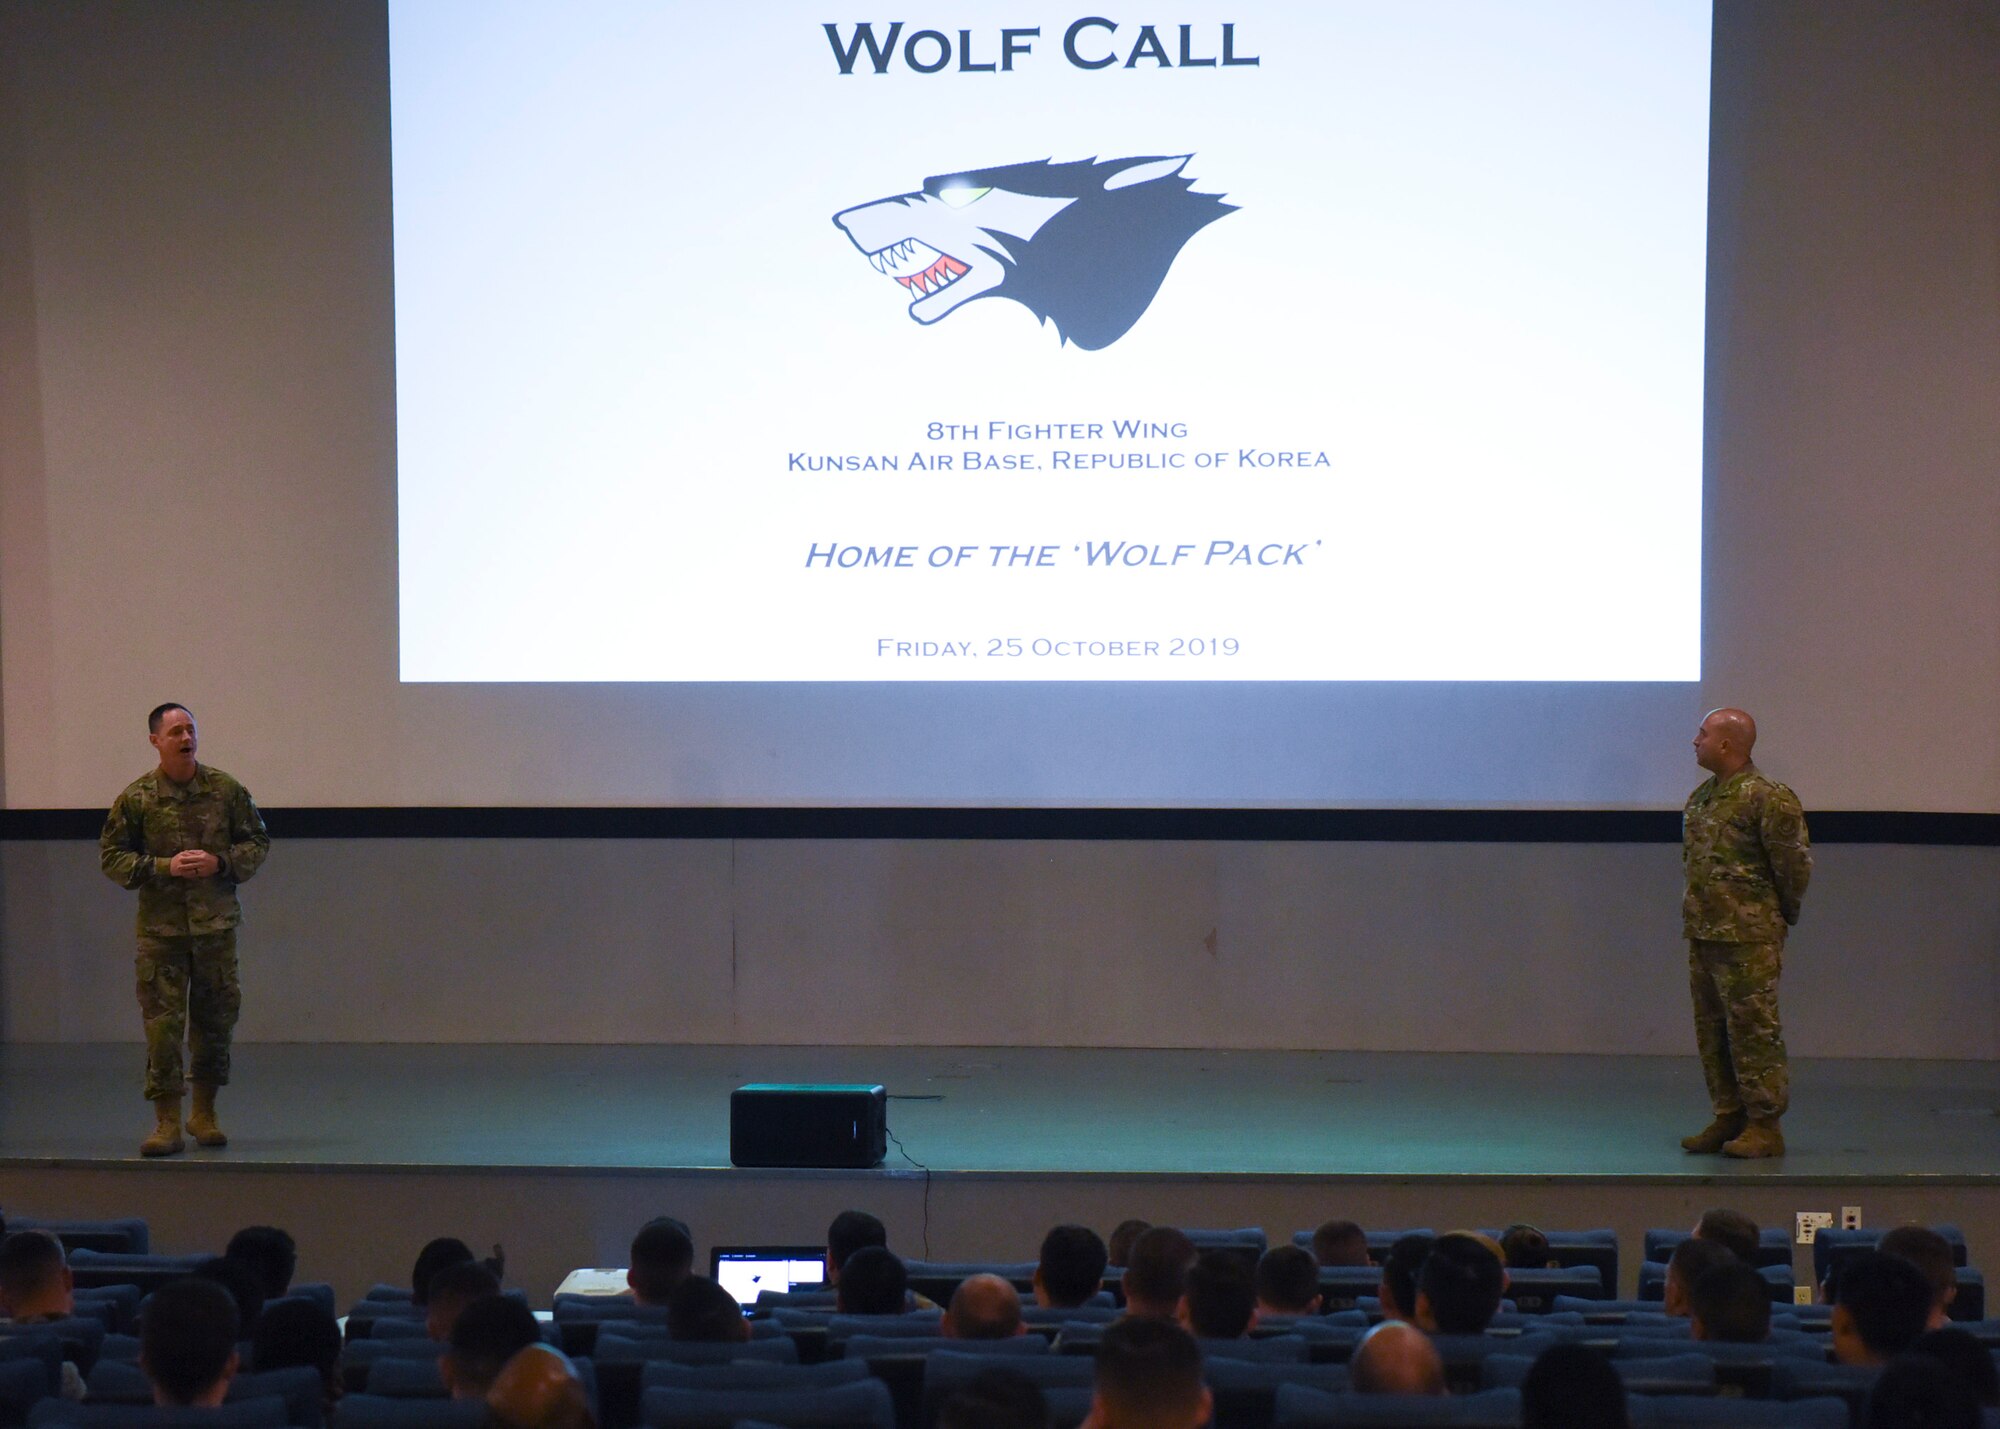 U.S. Air Force Col. Tad Clark, 8th Fighter Wing commander and Chief Master Sgt. Steve Cenov, 8th FW command chief, host their second commander’s call for the members of the Wolf Pack at Kunsan Air Base, Republic of Korea, Oct. 25, 2019. The commander’s call gave base leaders the opportunity to elaborate on multi-domain operations, squadron empowerment, multi-functional Airmen, agile combat employment, readiness and innovation. (U.S. Air Force photo by Staff Sgt. Anthony Hetlage)